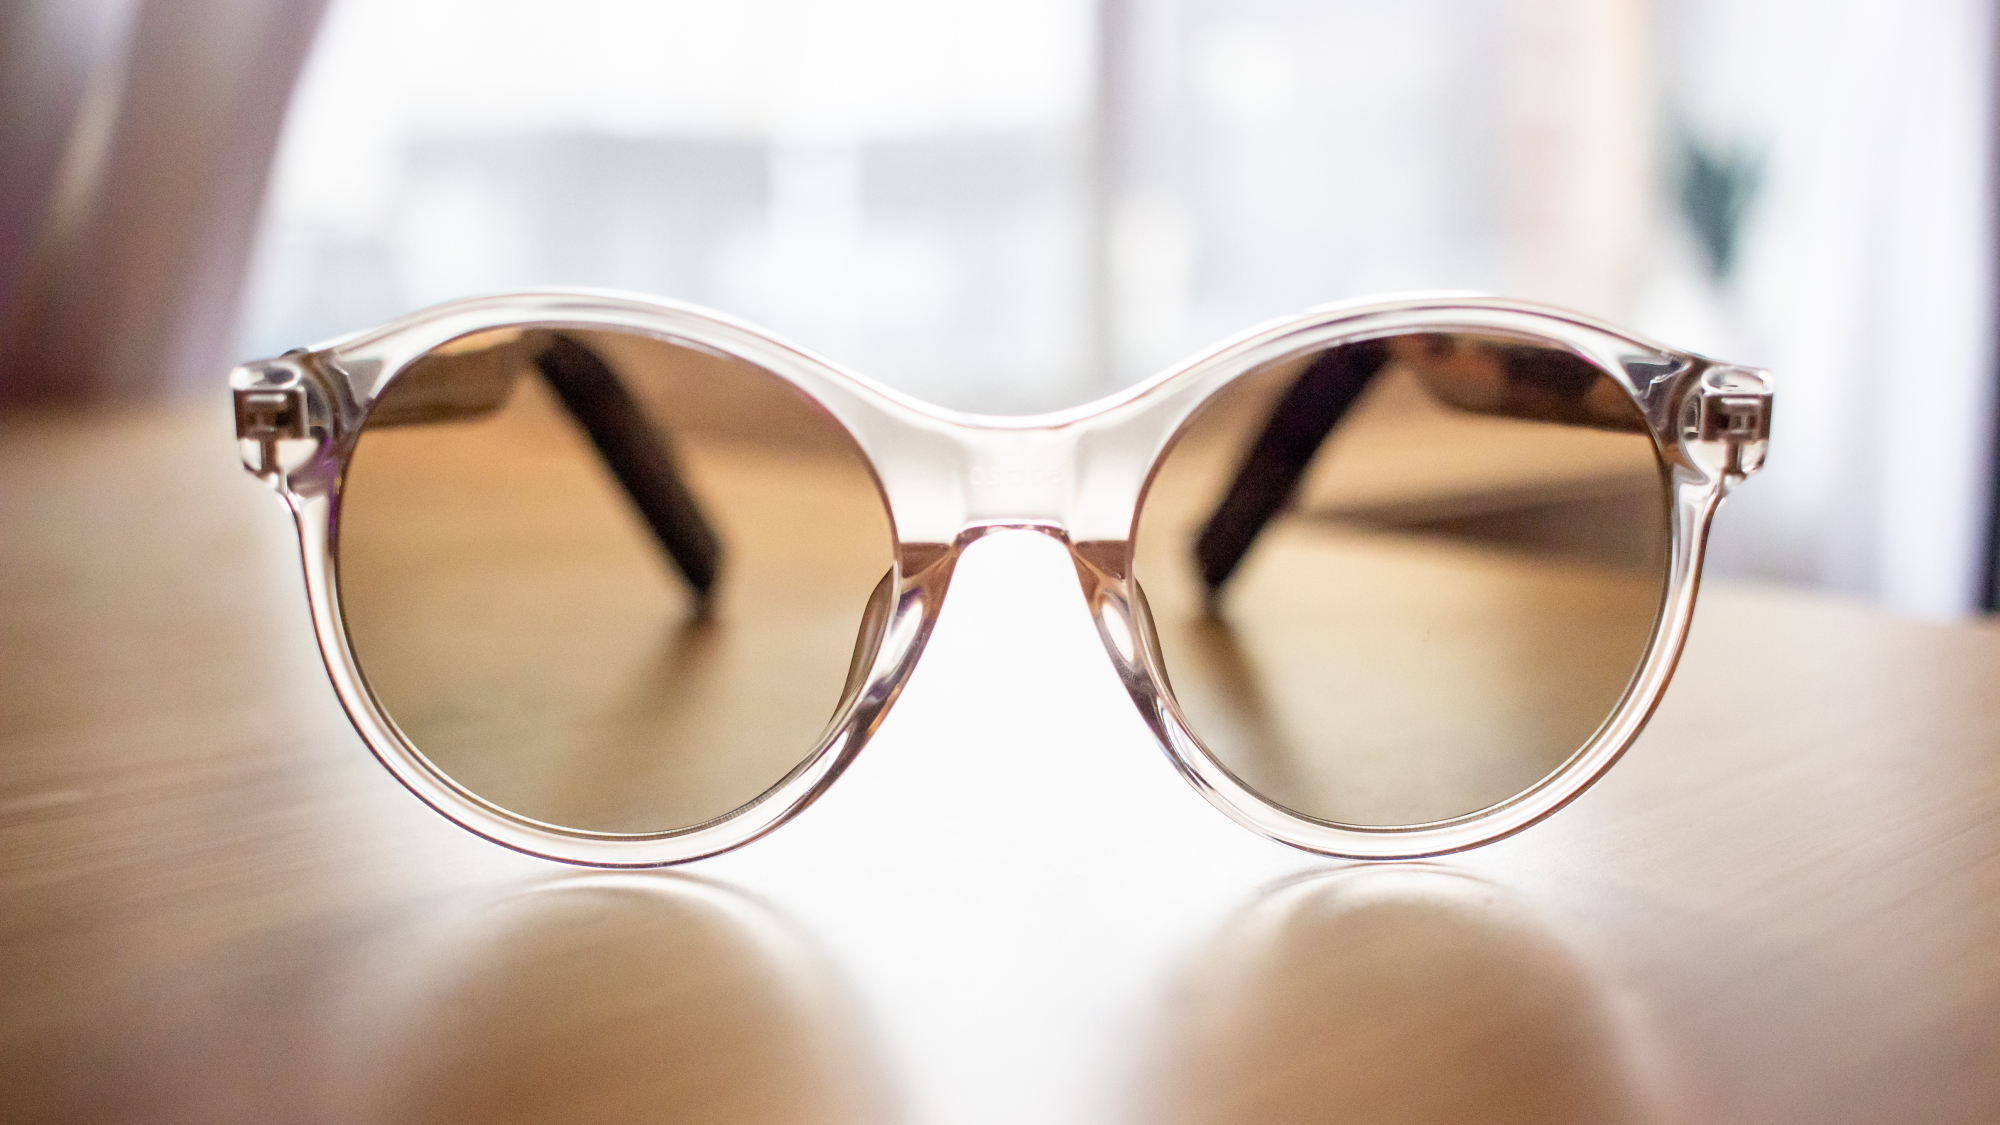 A pair of sunglasses resting on a flat surface